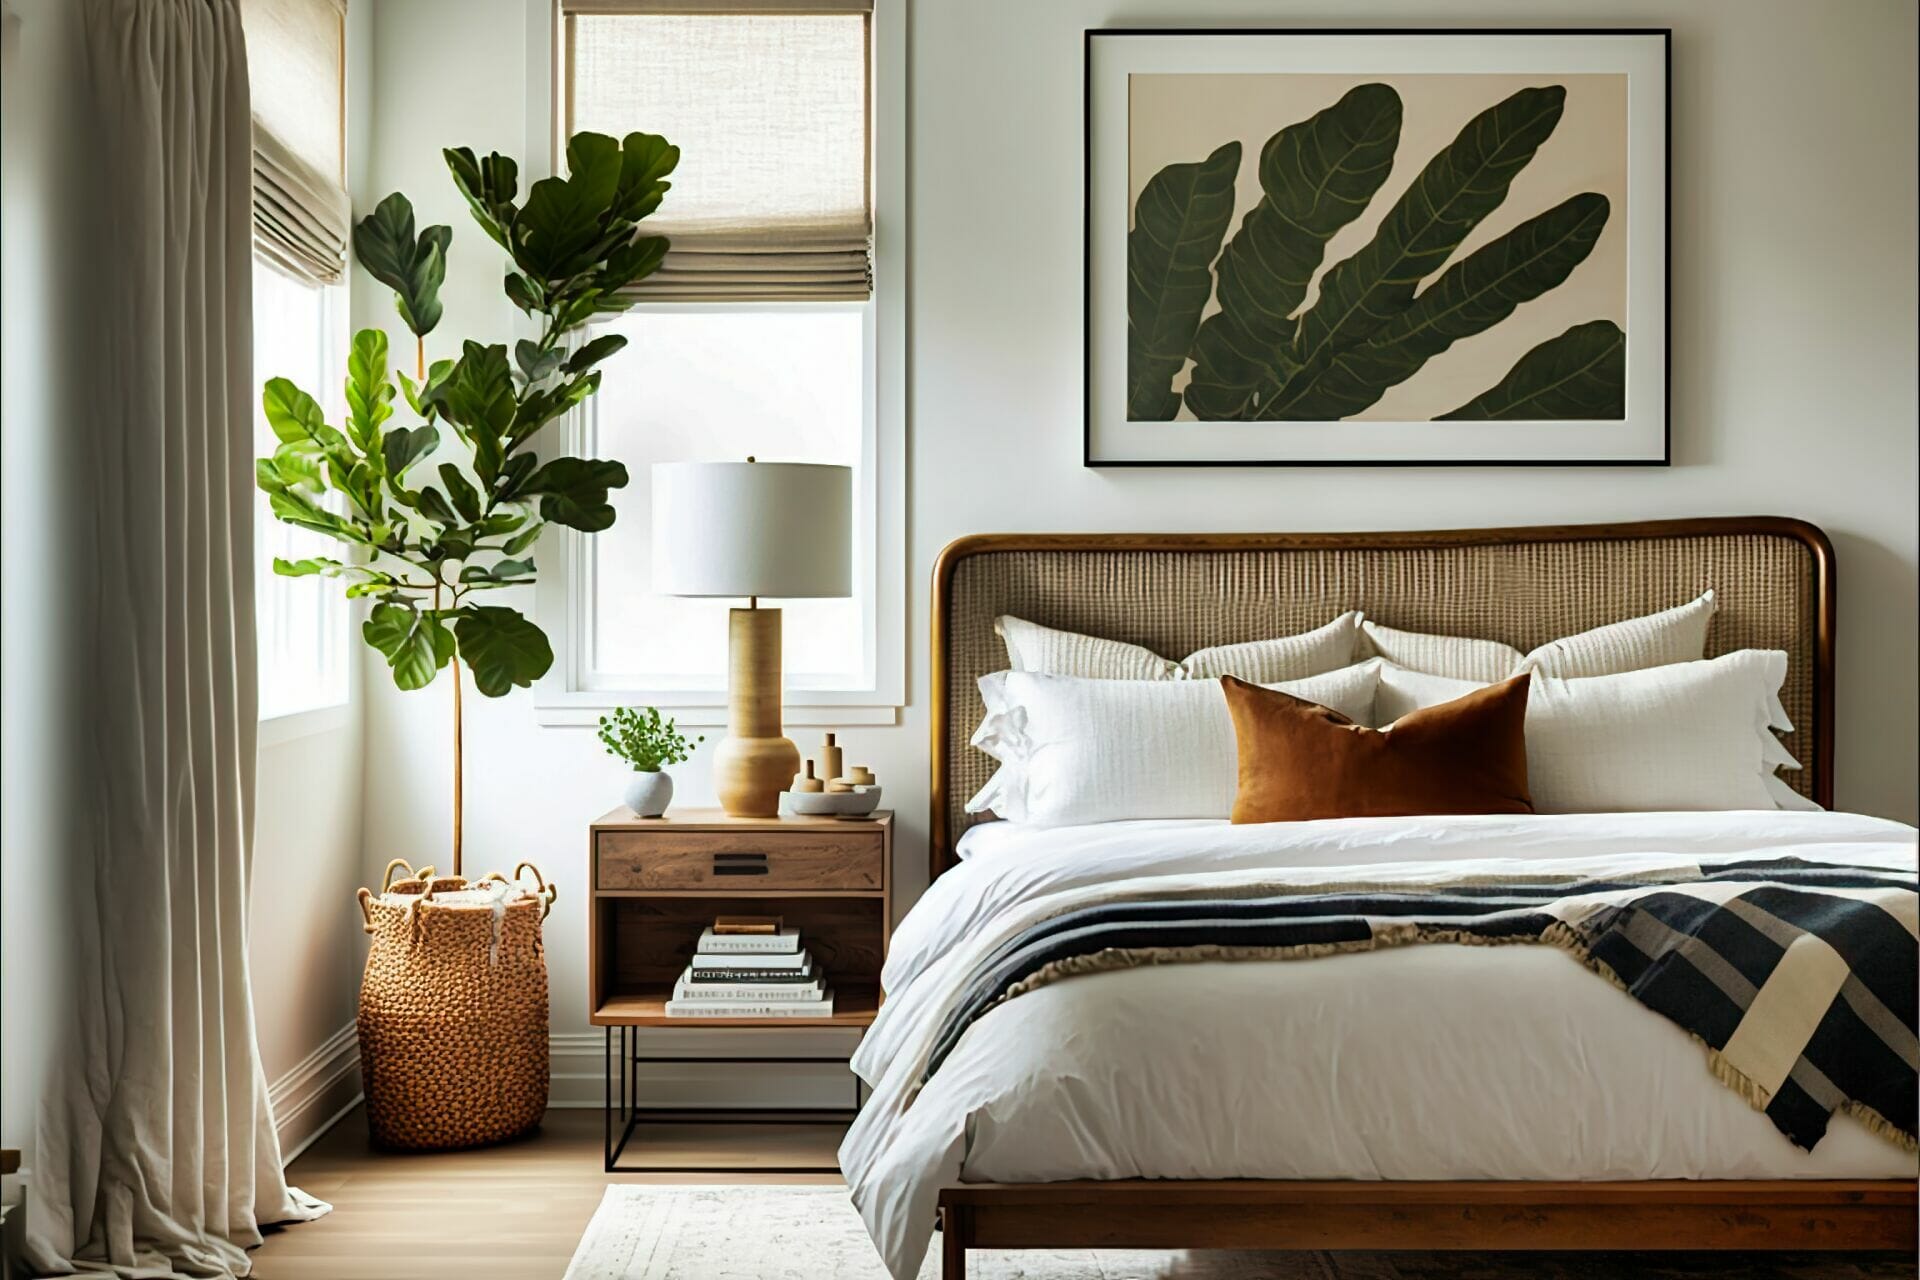 Mid-Century Modern Bedroom – A Calming Modern Bedroom Featuring A Wooden Bed Frame, A Natural Woven Headboard, A Rattan Nightstand, And A Potted Fiddle Leaf Fig.